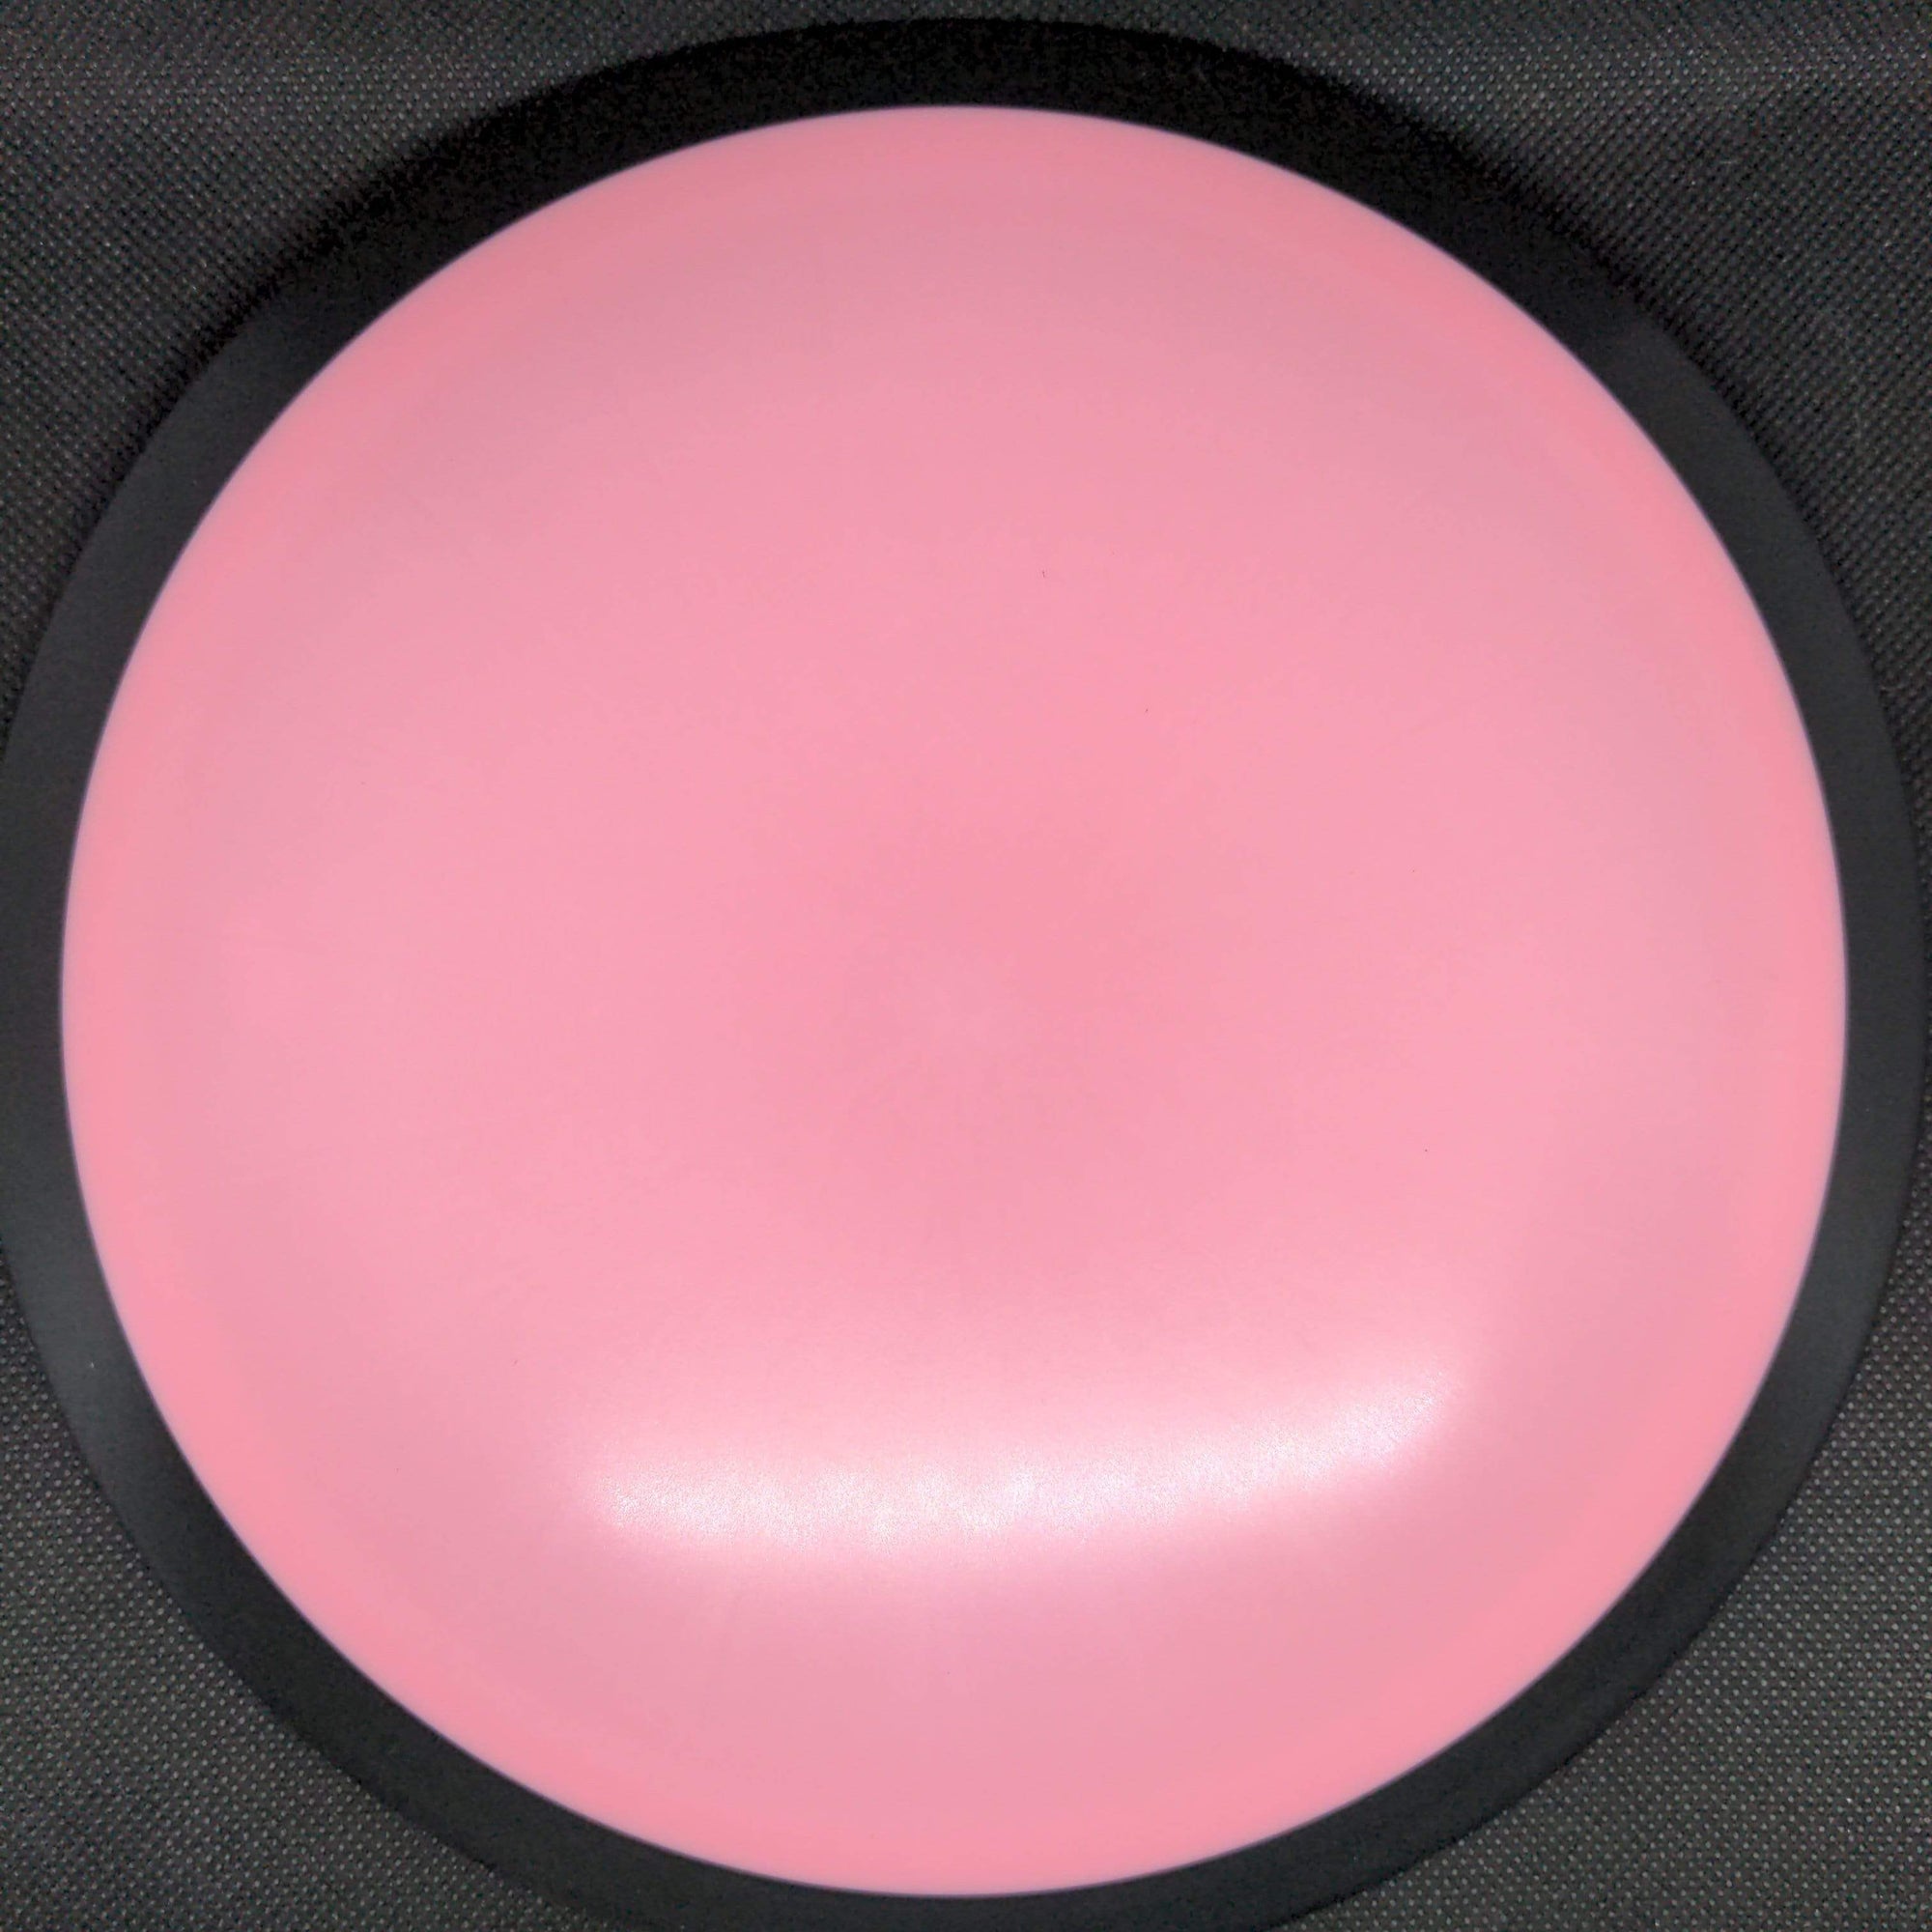 MVP Distance Driver Pink 175g Fission Photon - Blank